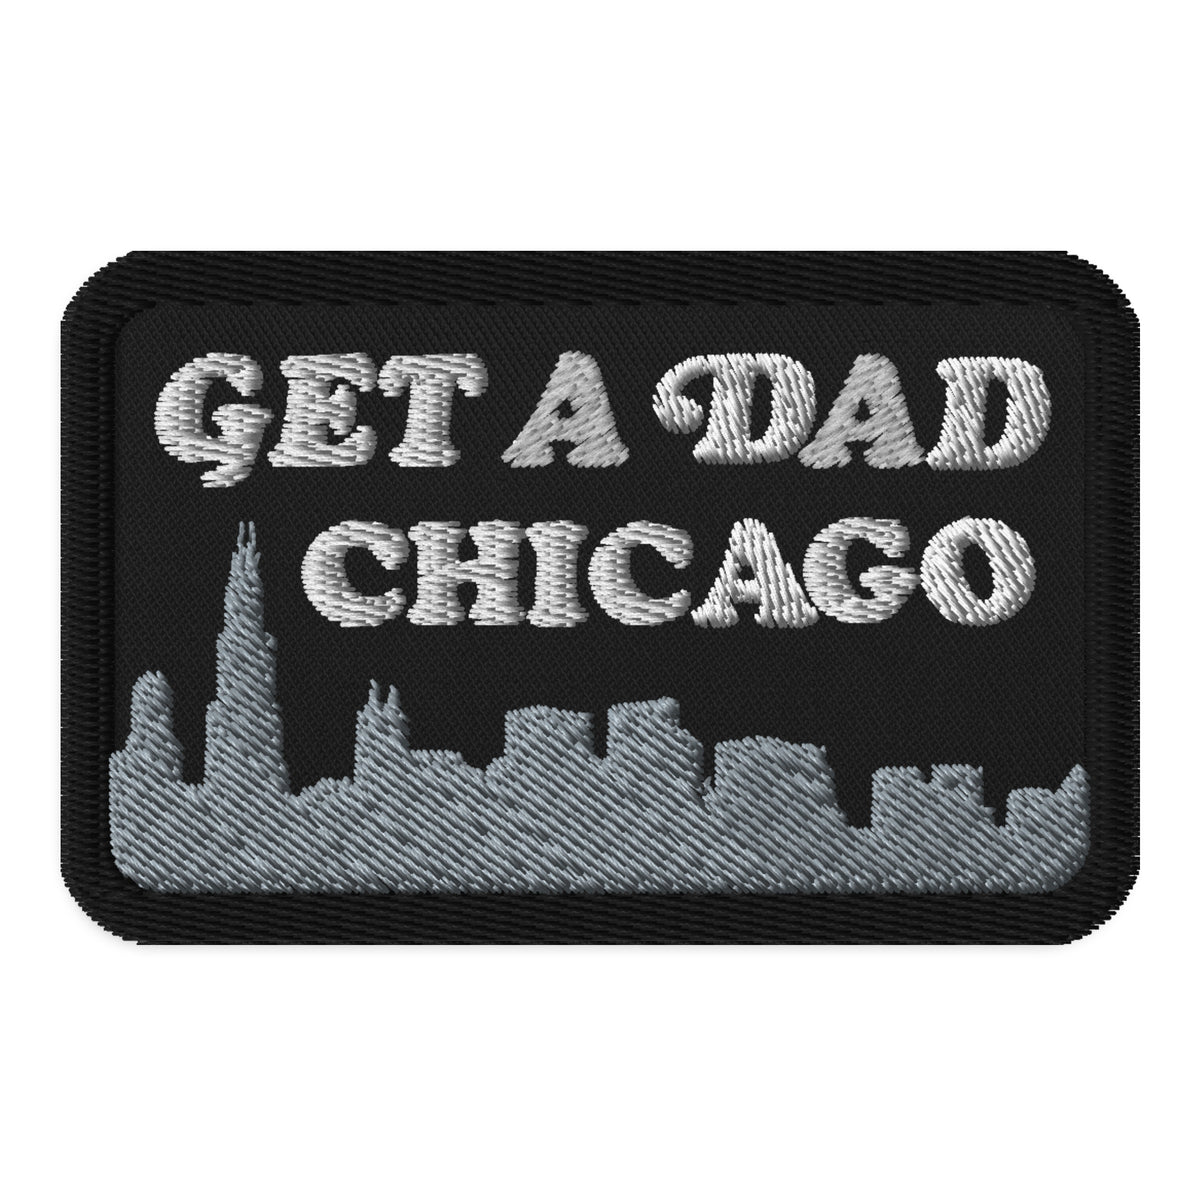 Get a Dad Chicago Morale Patch